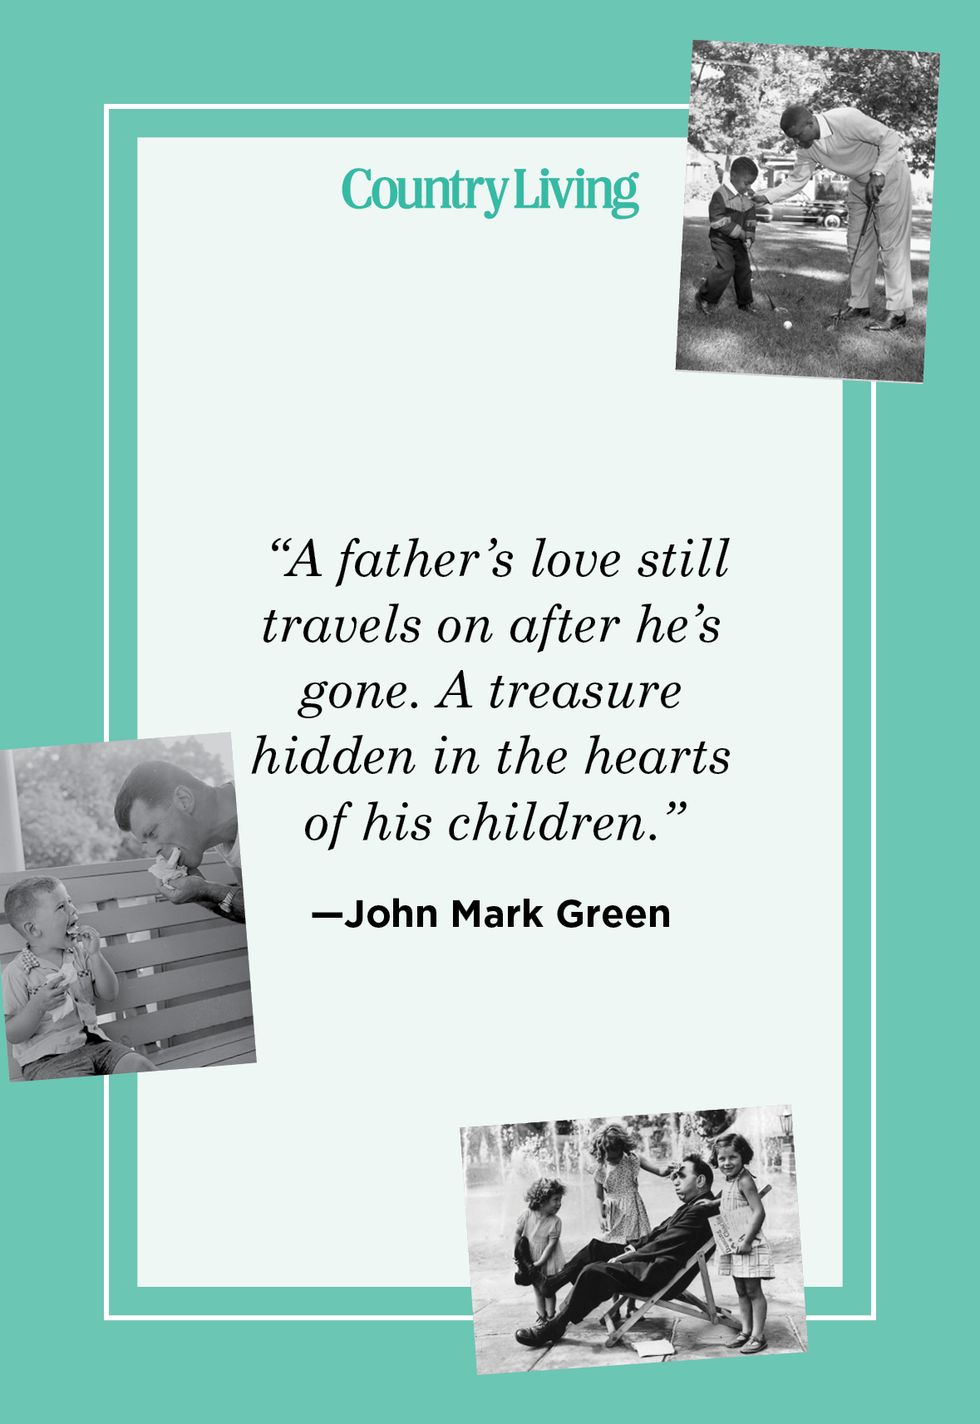 short father's love quote by john mark green